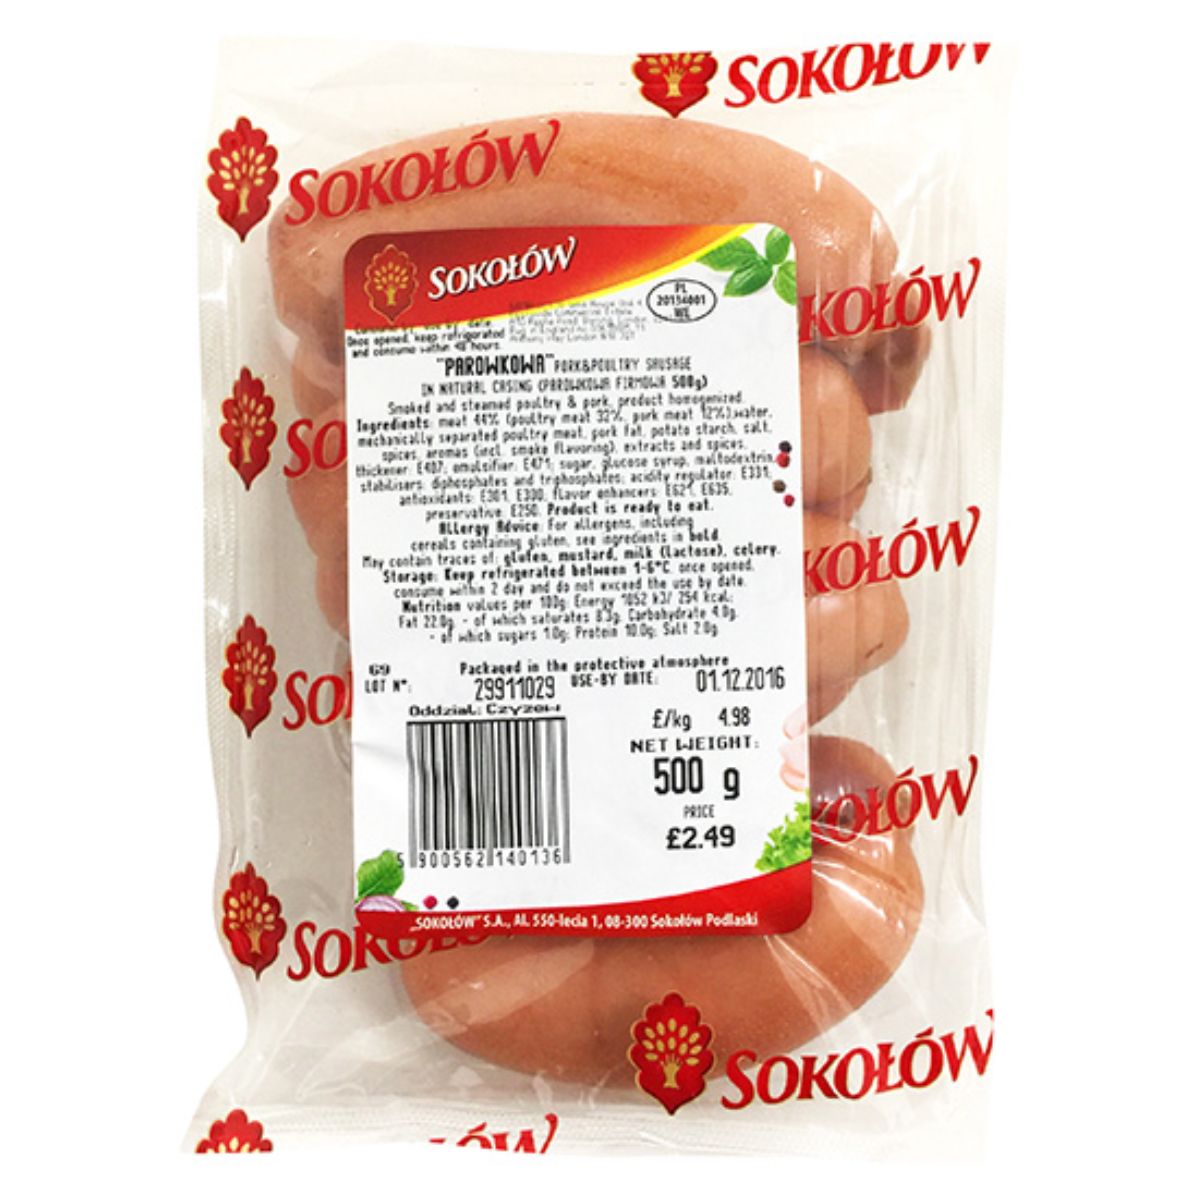 Sokolow - Parowkowa Pork Sausage in Natural Casing - 500g in a plastic bag on a white background.